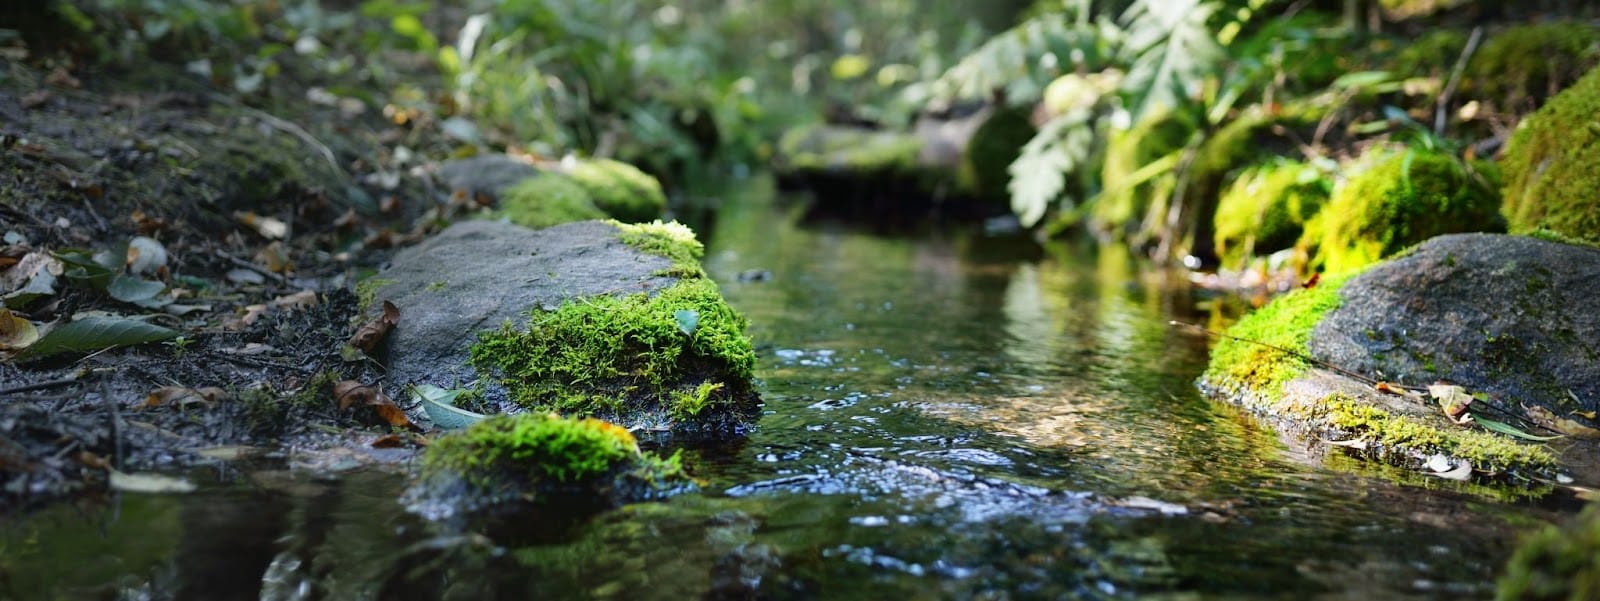 A serene stream flows through a mossy forest with rocks, part of a hunting ecosystem.